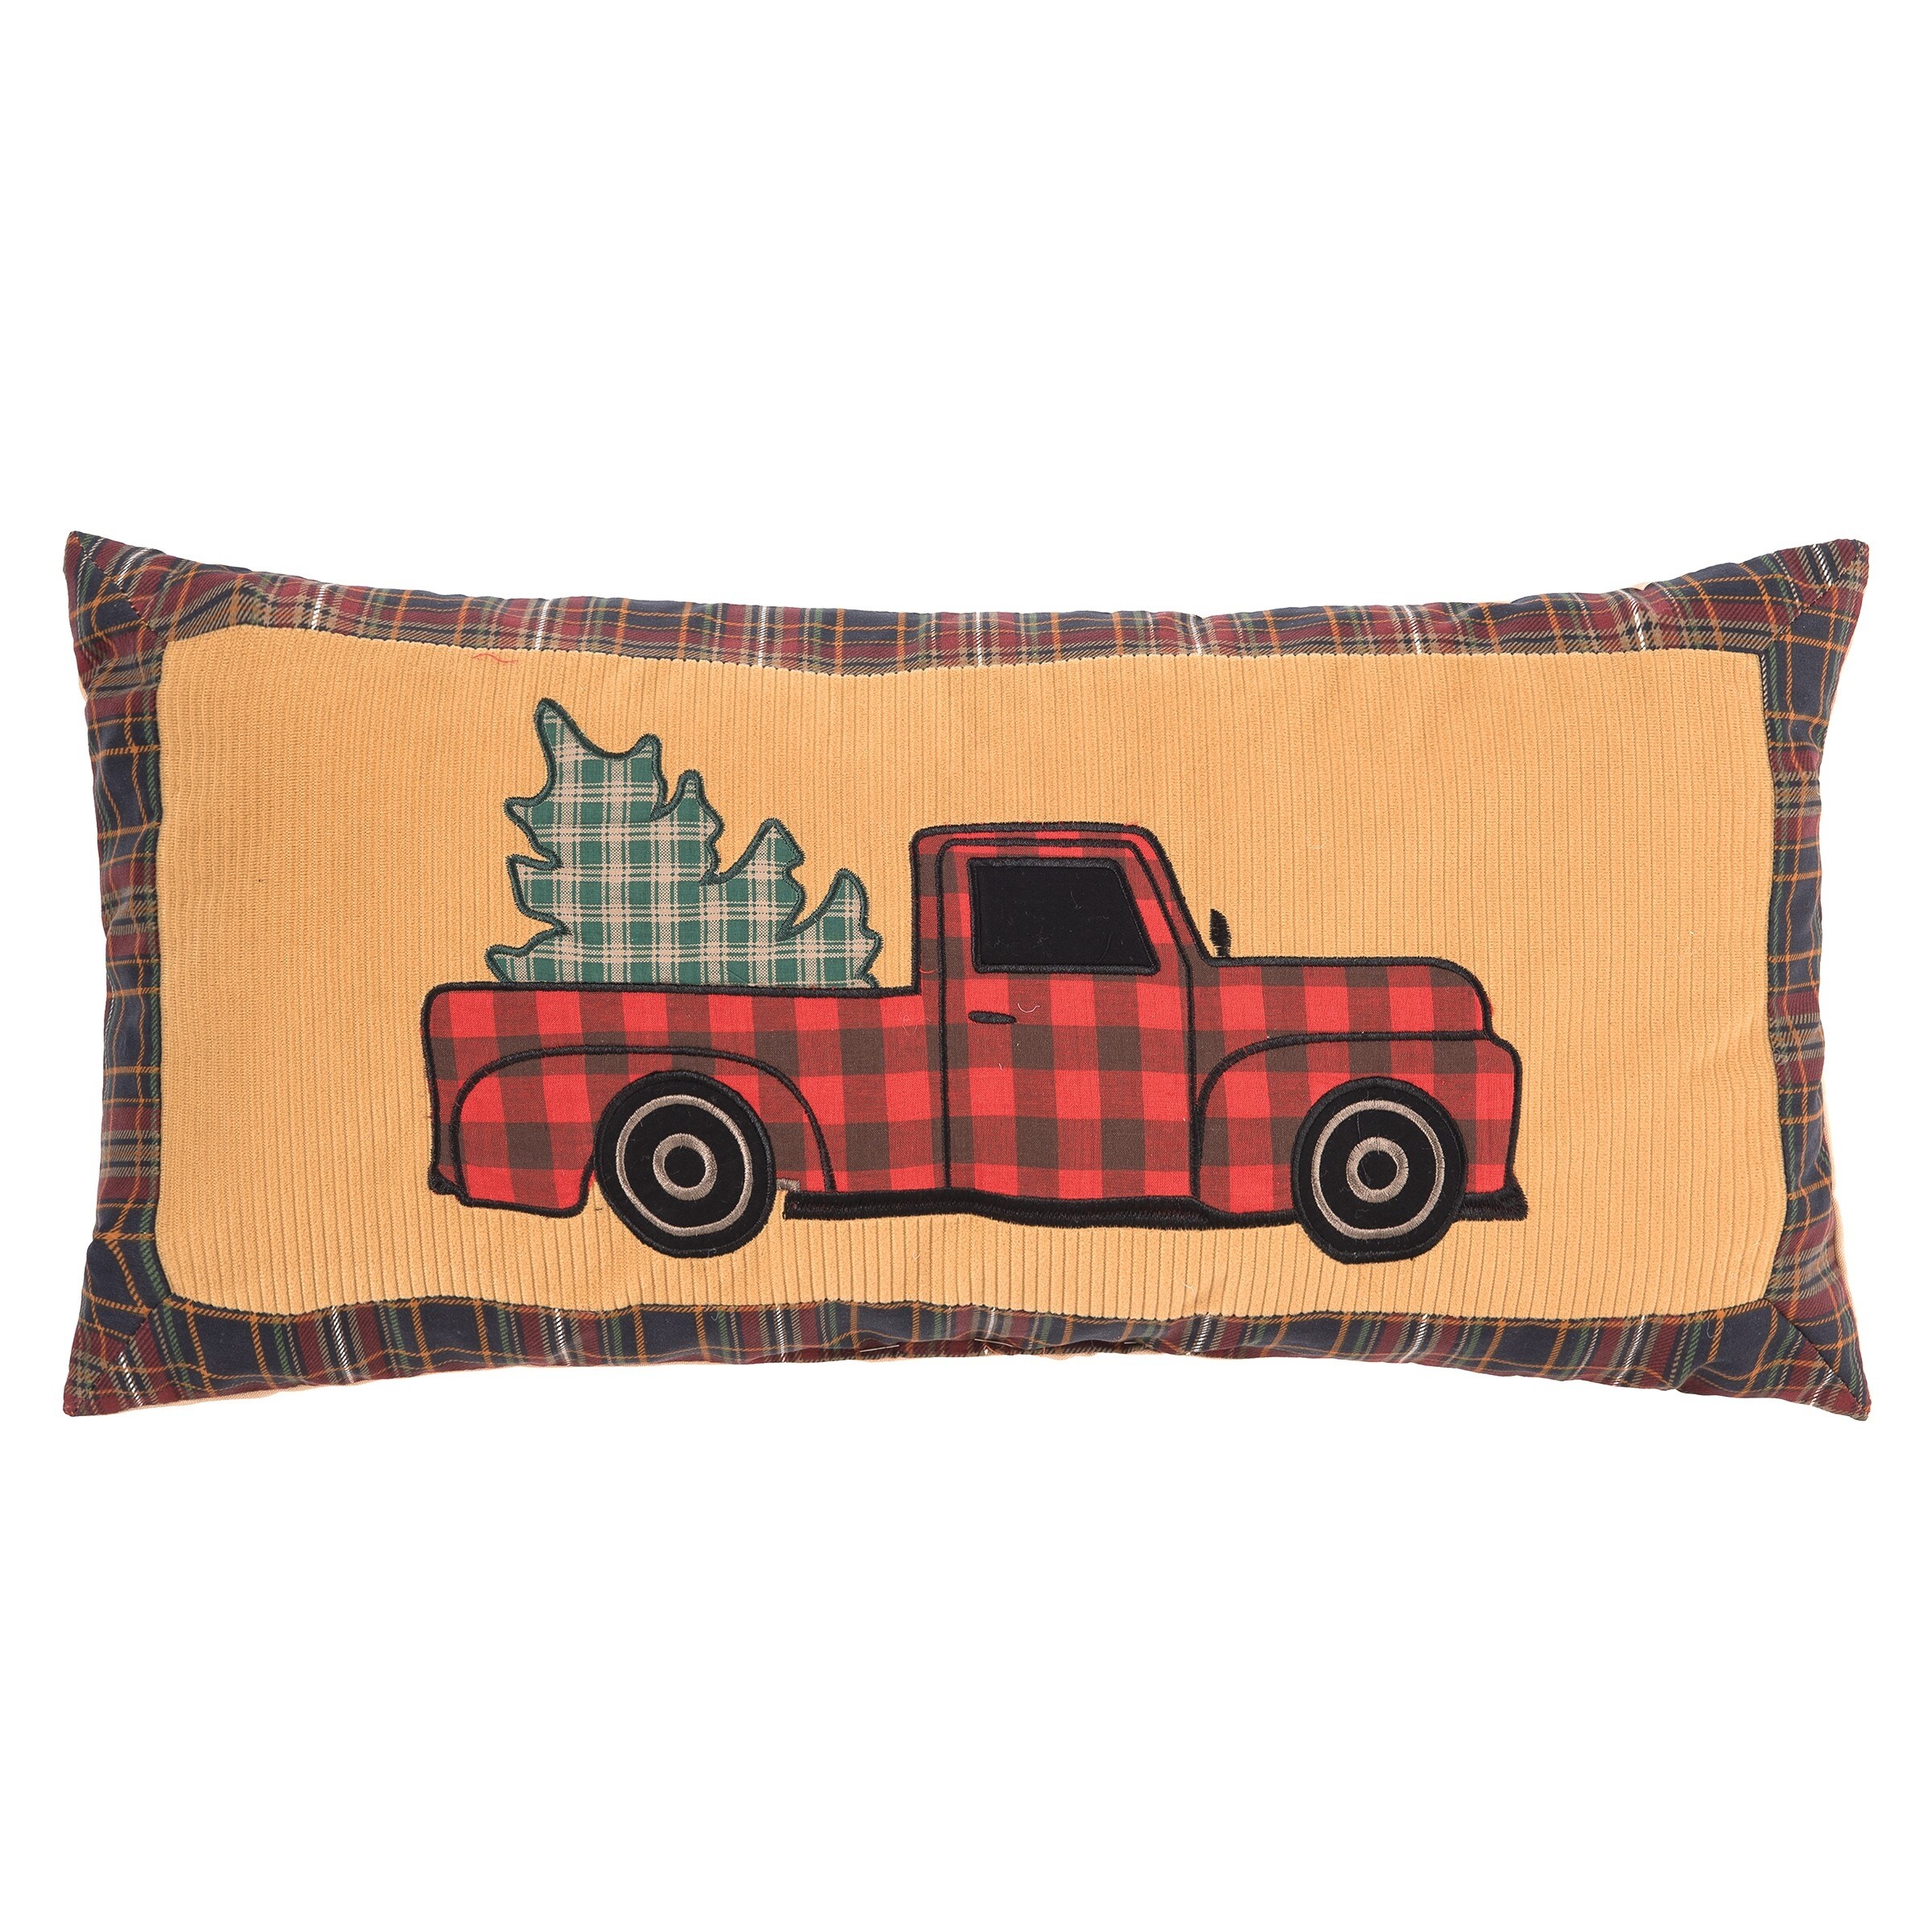 https://ak1.ostkcdn.com/images/products/is/images/direct/db08e733f226b072417b15848e4958dc0fd0f23b/Wild-Wood-For-Truck-Pillow.jpg